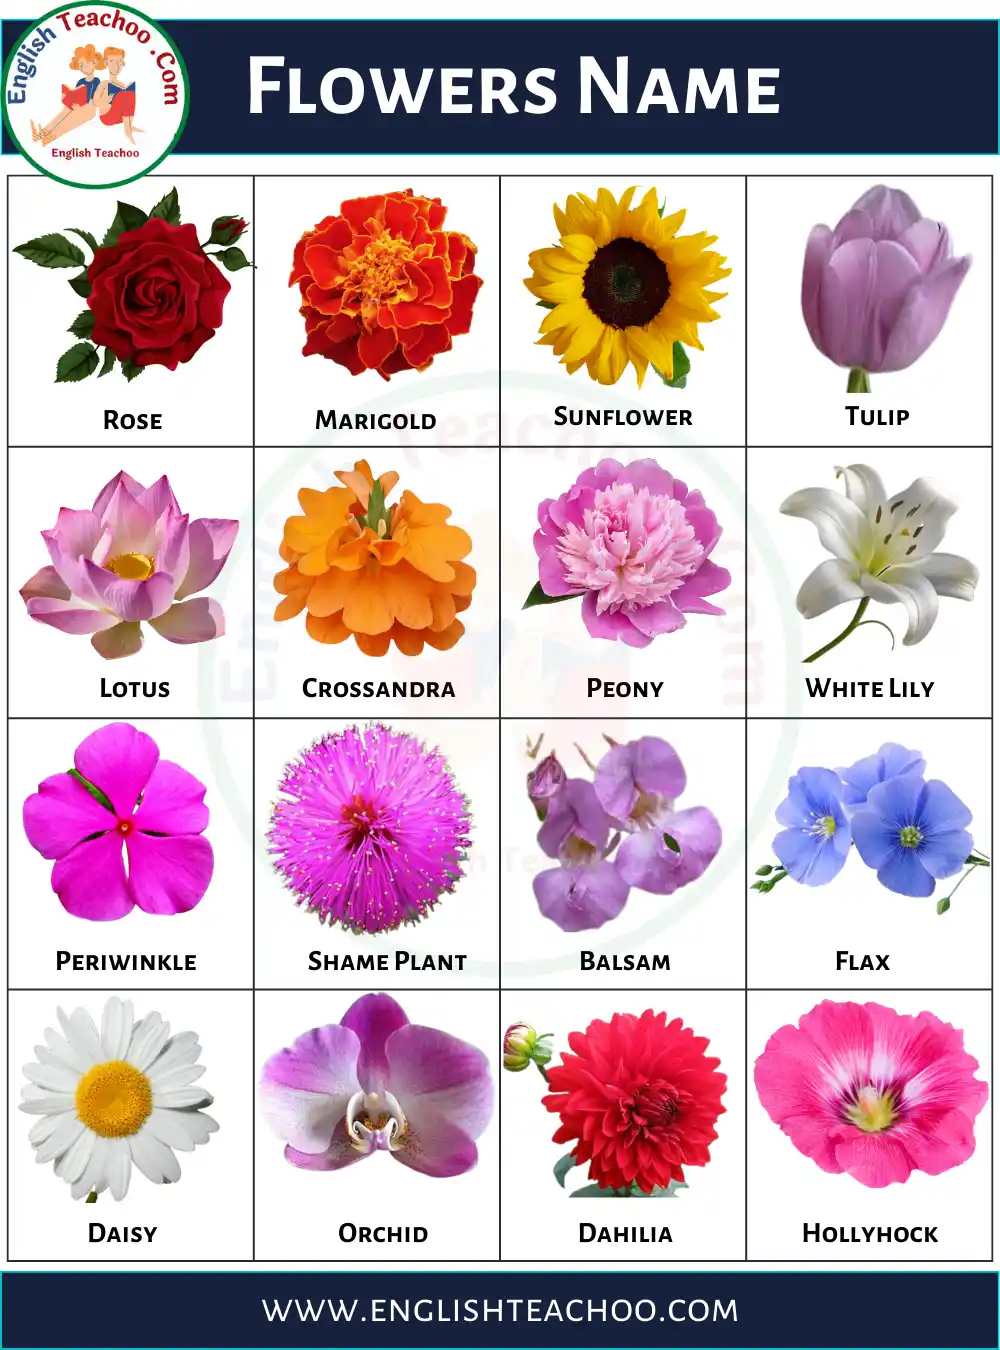 10 Flowers Name In English With Pictures, photos